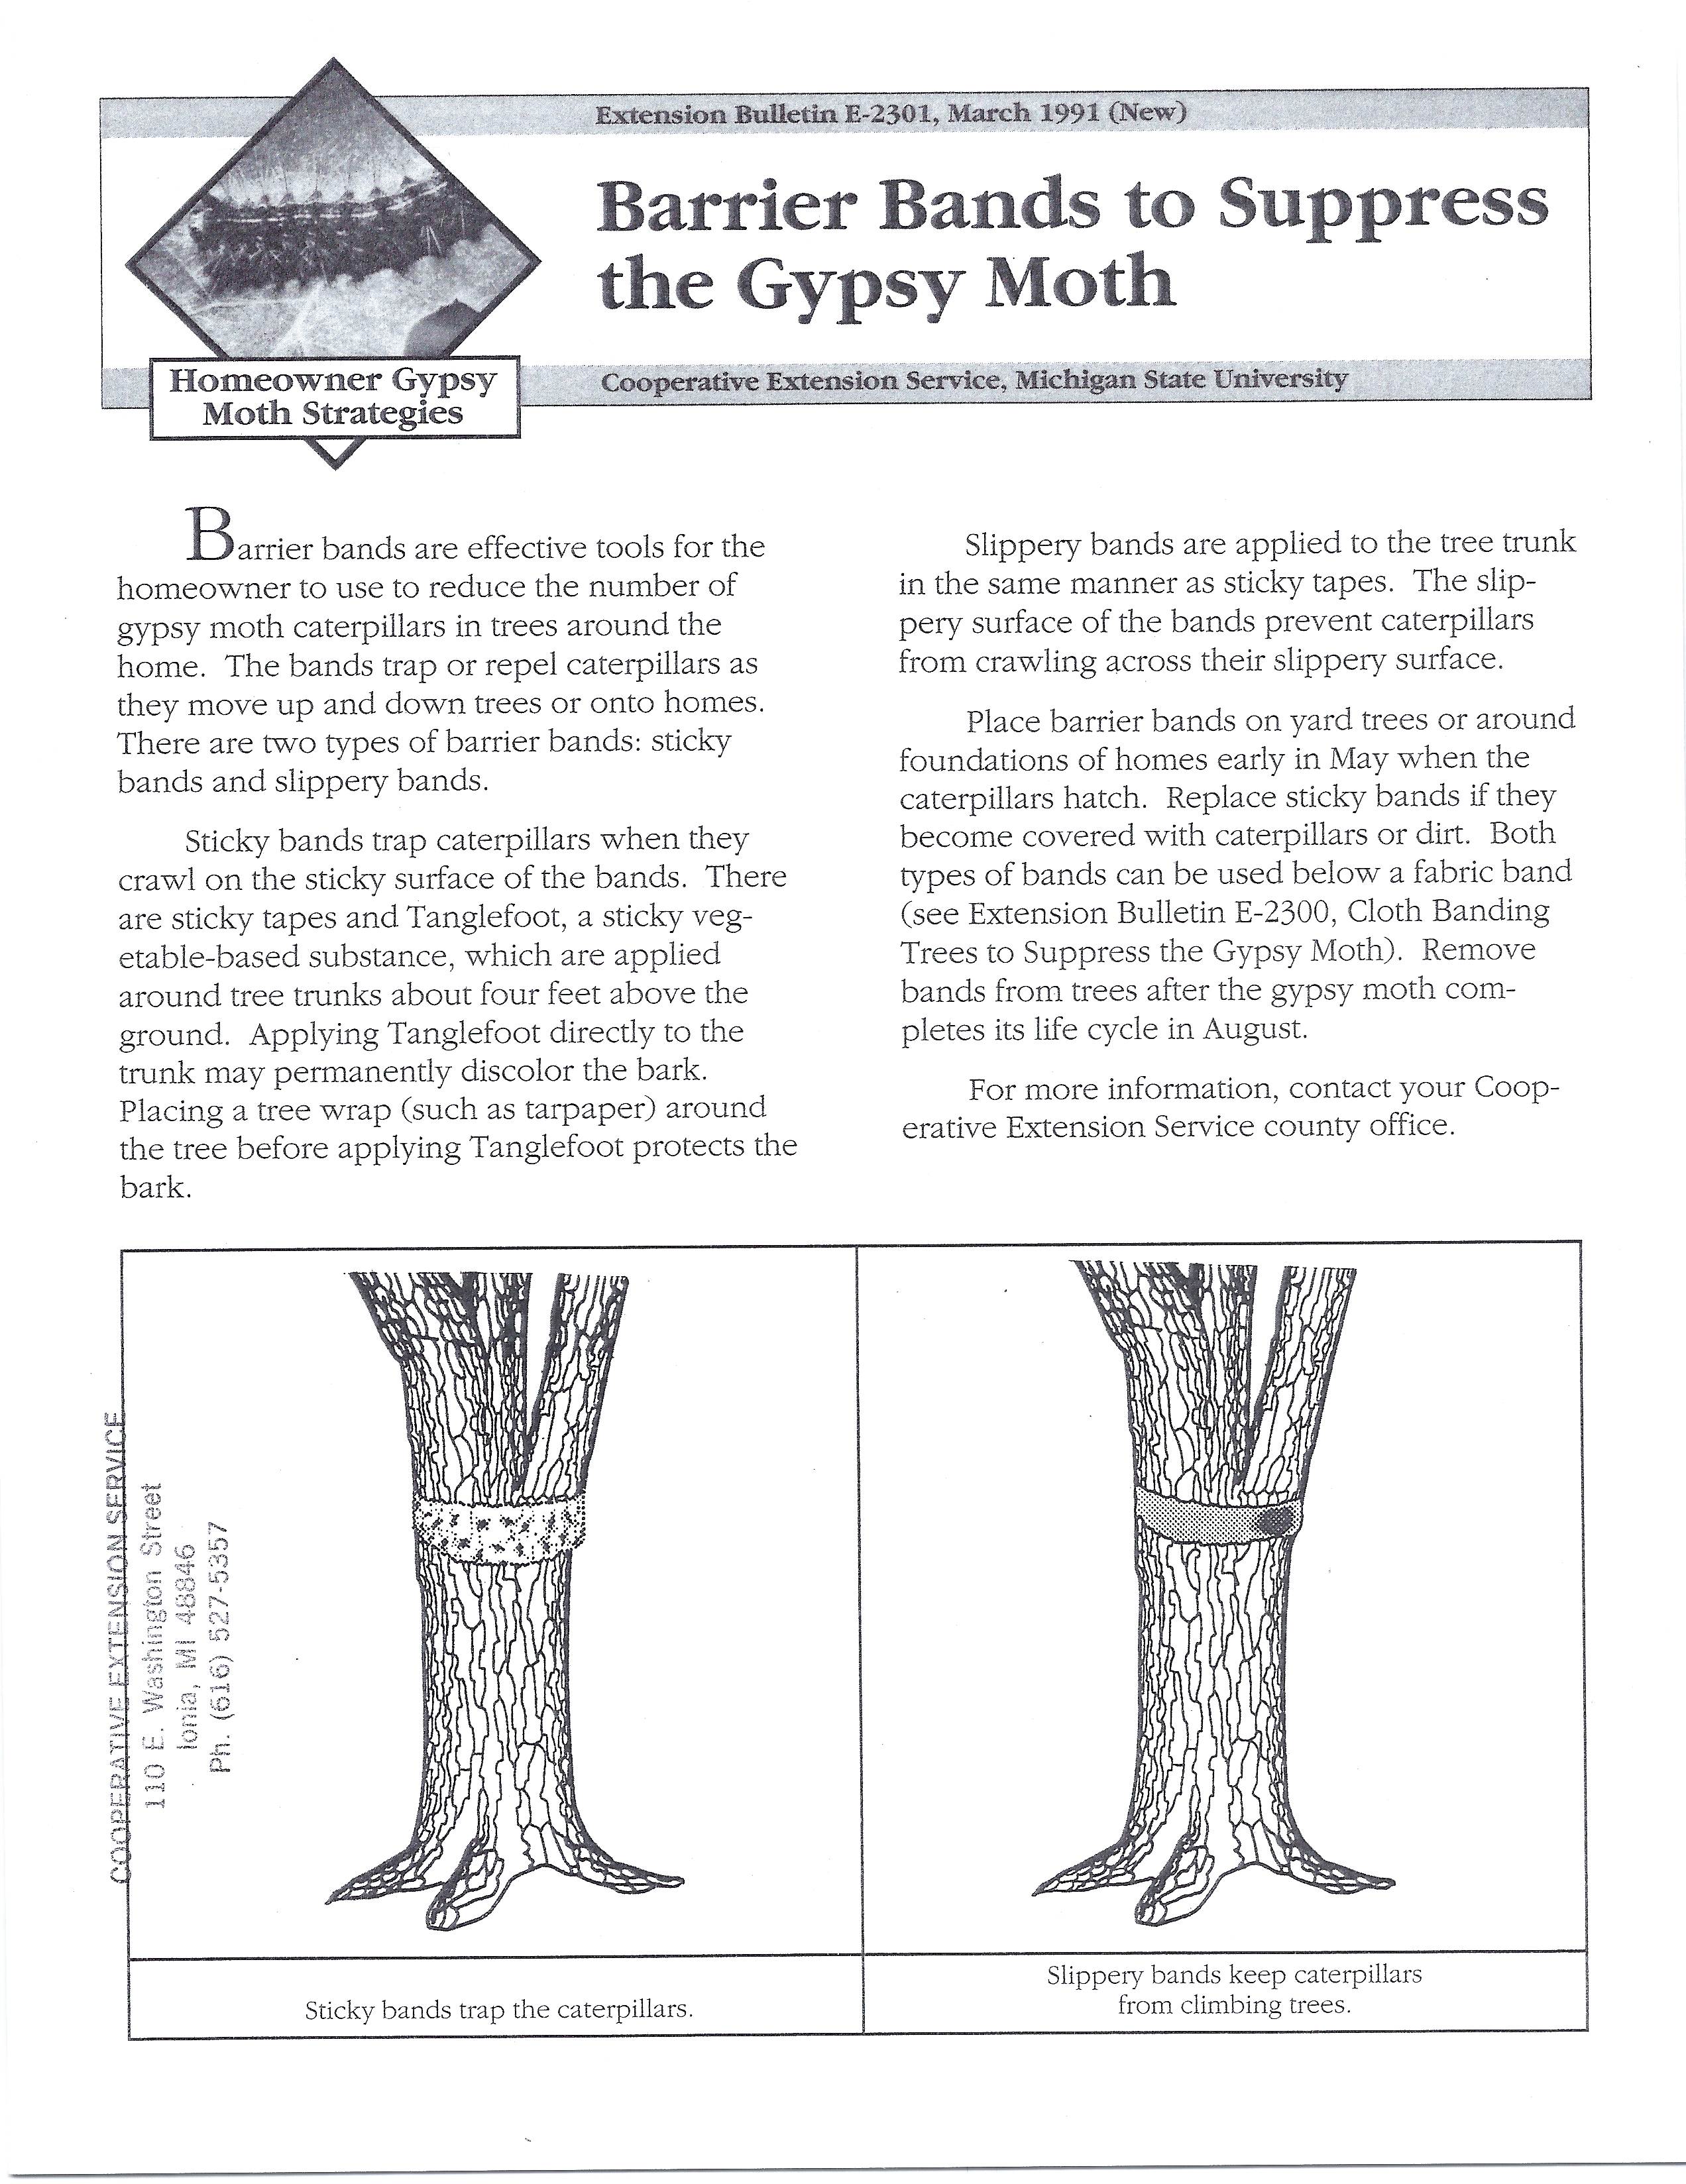 Info about controlling gypsy moth_Page_1